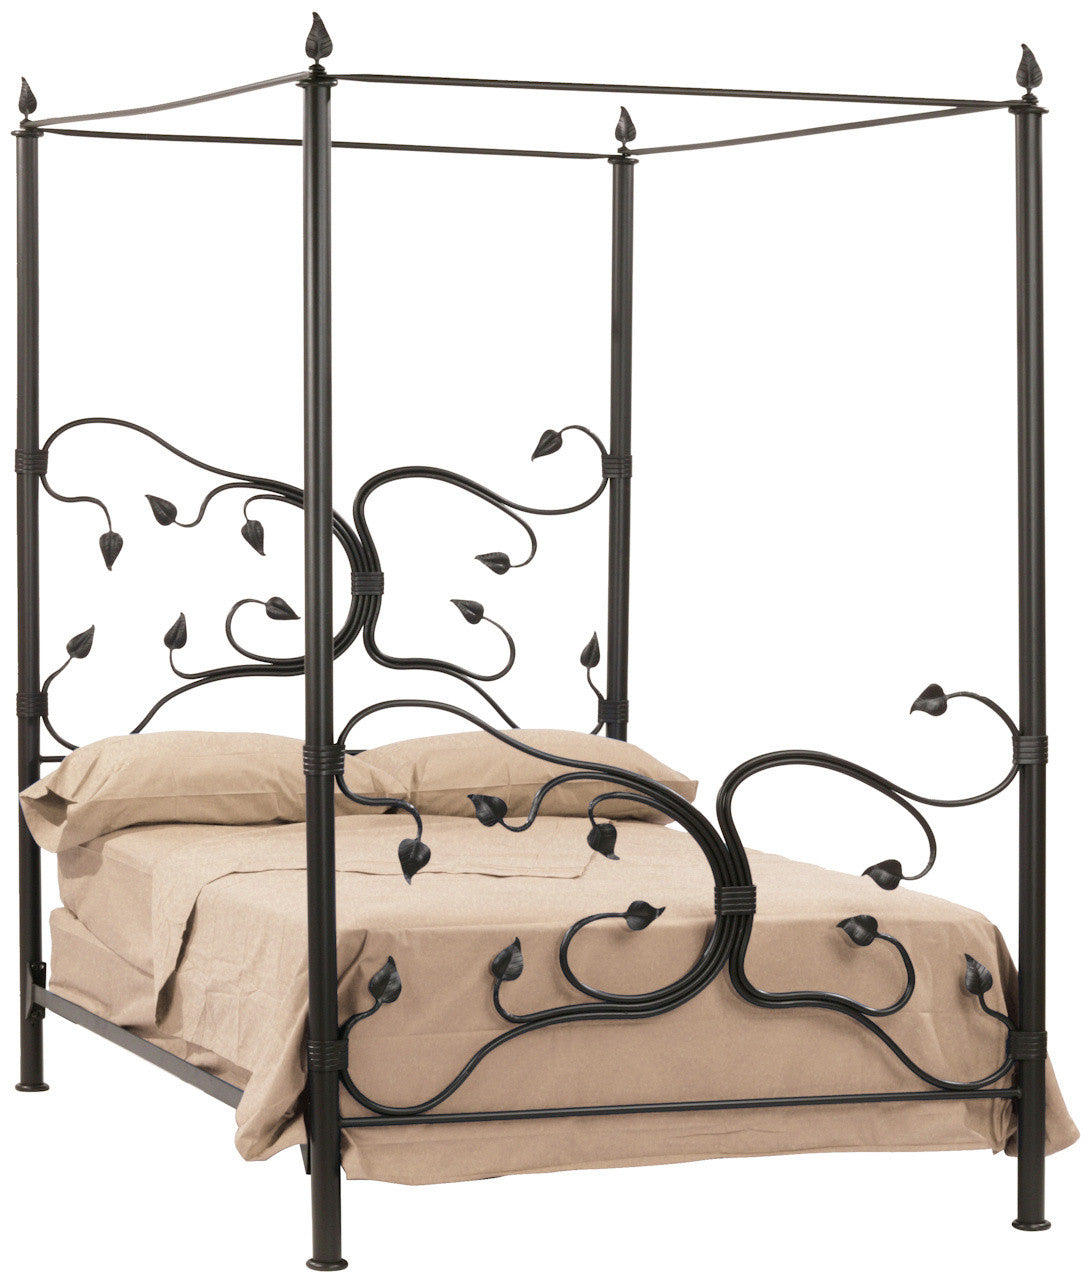 Stone County Ironworks 900-802 Eden Isle Canopy California King Bed